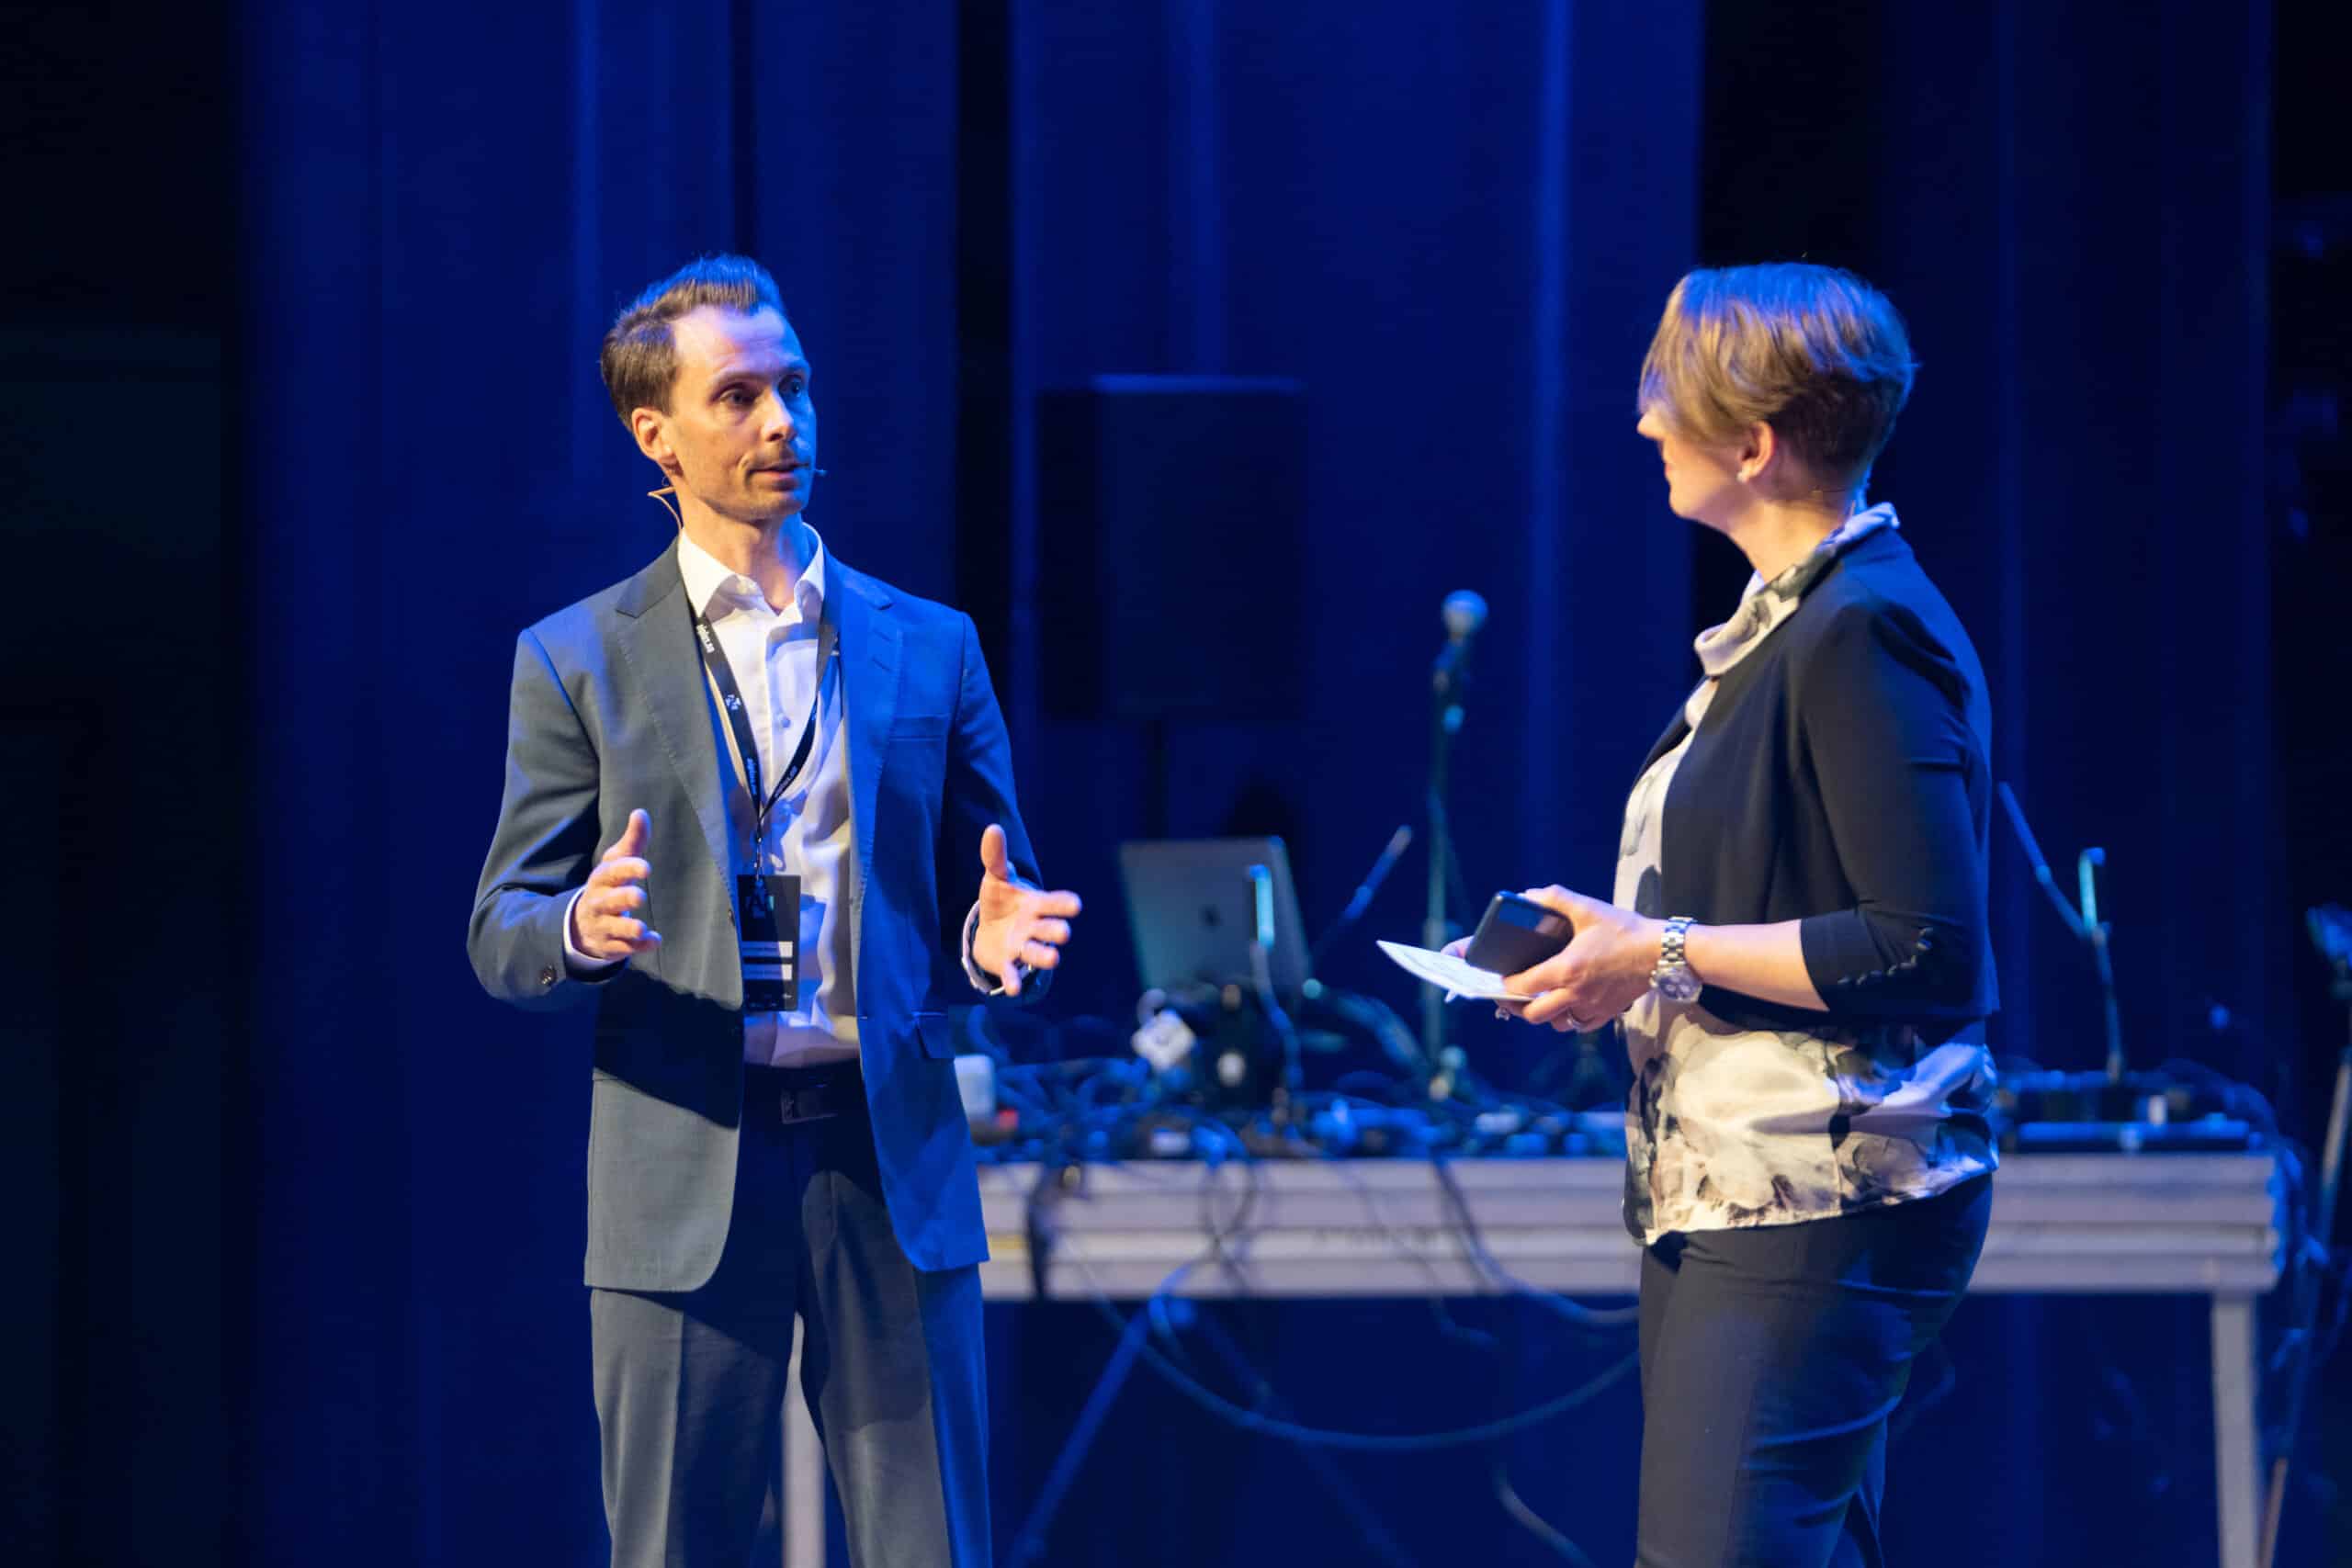 Jonas Aamodt Moræus from the AI+ partner Institute of Energy Technology talking to hostess Ruth Astrid Sæter. PHOTO: Stein Johnsen, Contentvideo.no